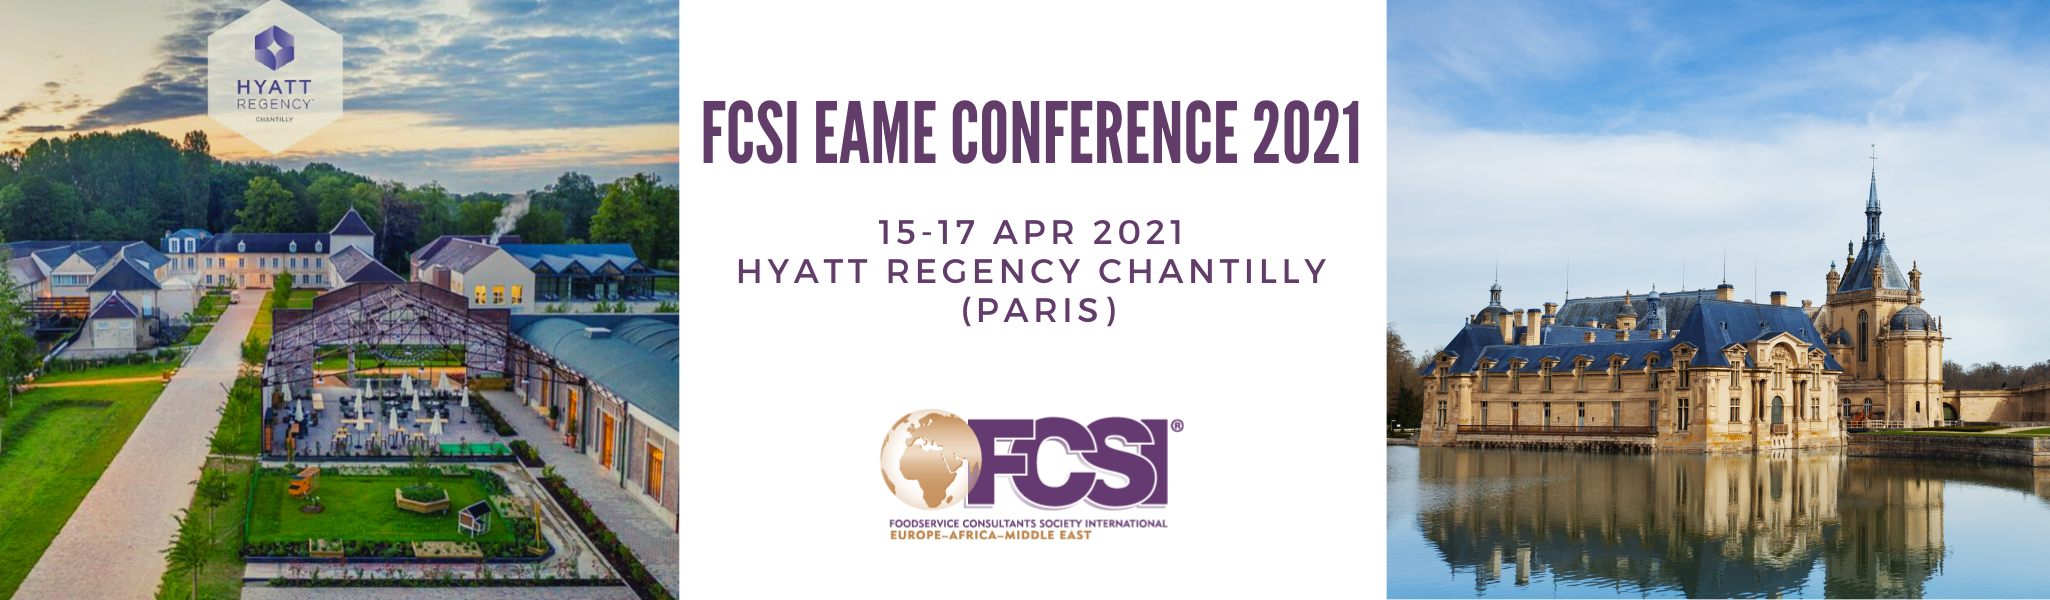 FCSI EAME Conference banner NEW